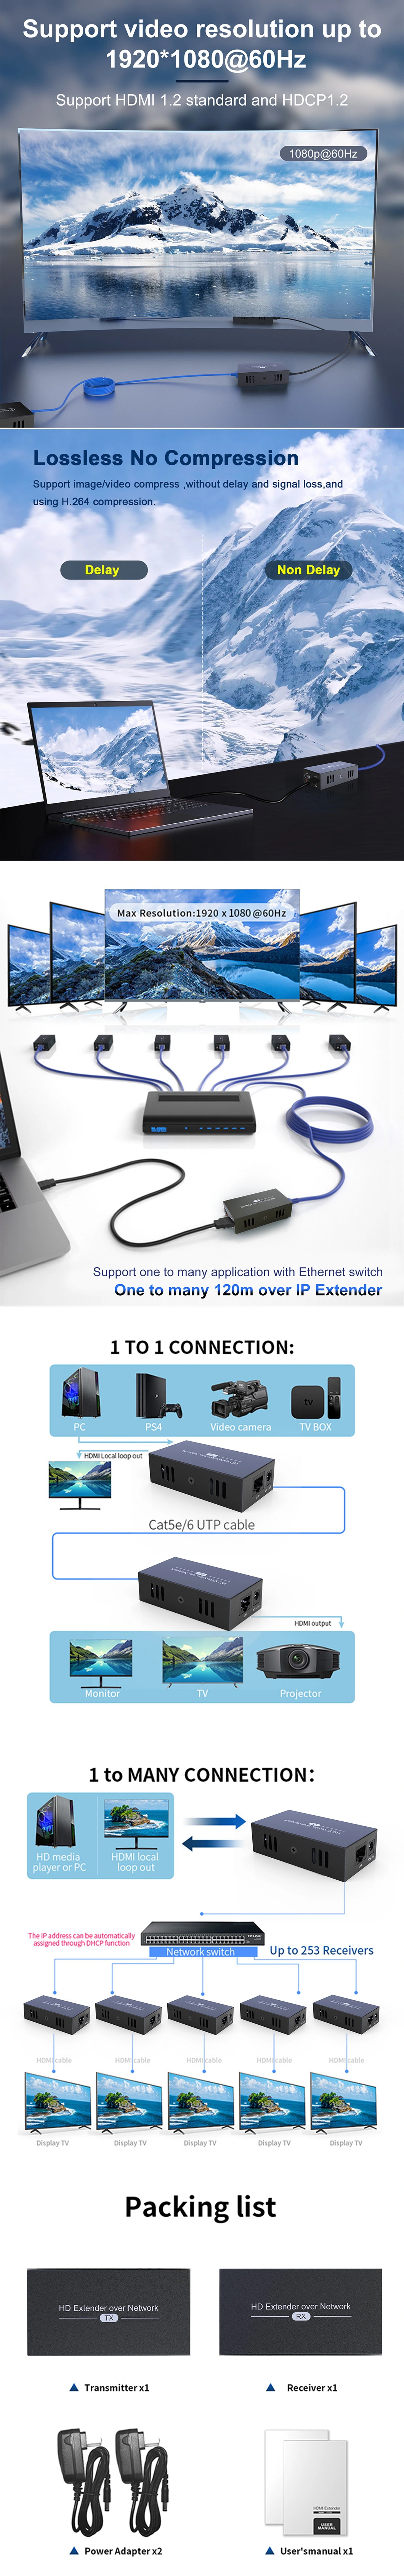 One to Many Cat5/6 Cable Video HDMI Extender 120m 1080P H264 Local Loop out HDMI Transmitter and Receiver Over IP